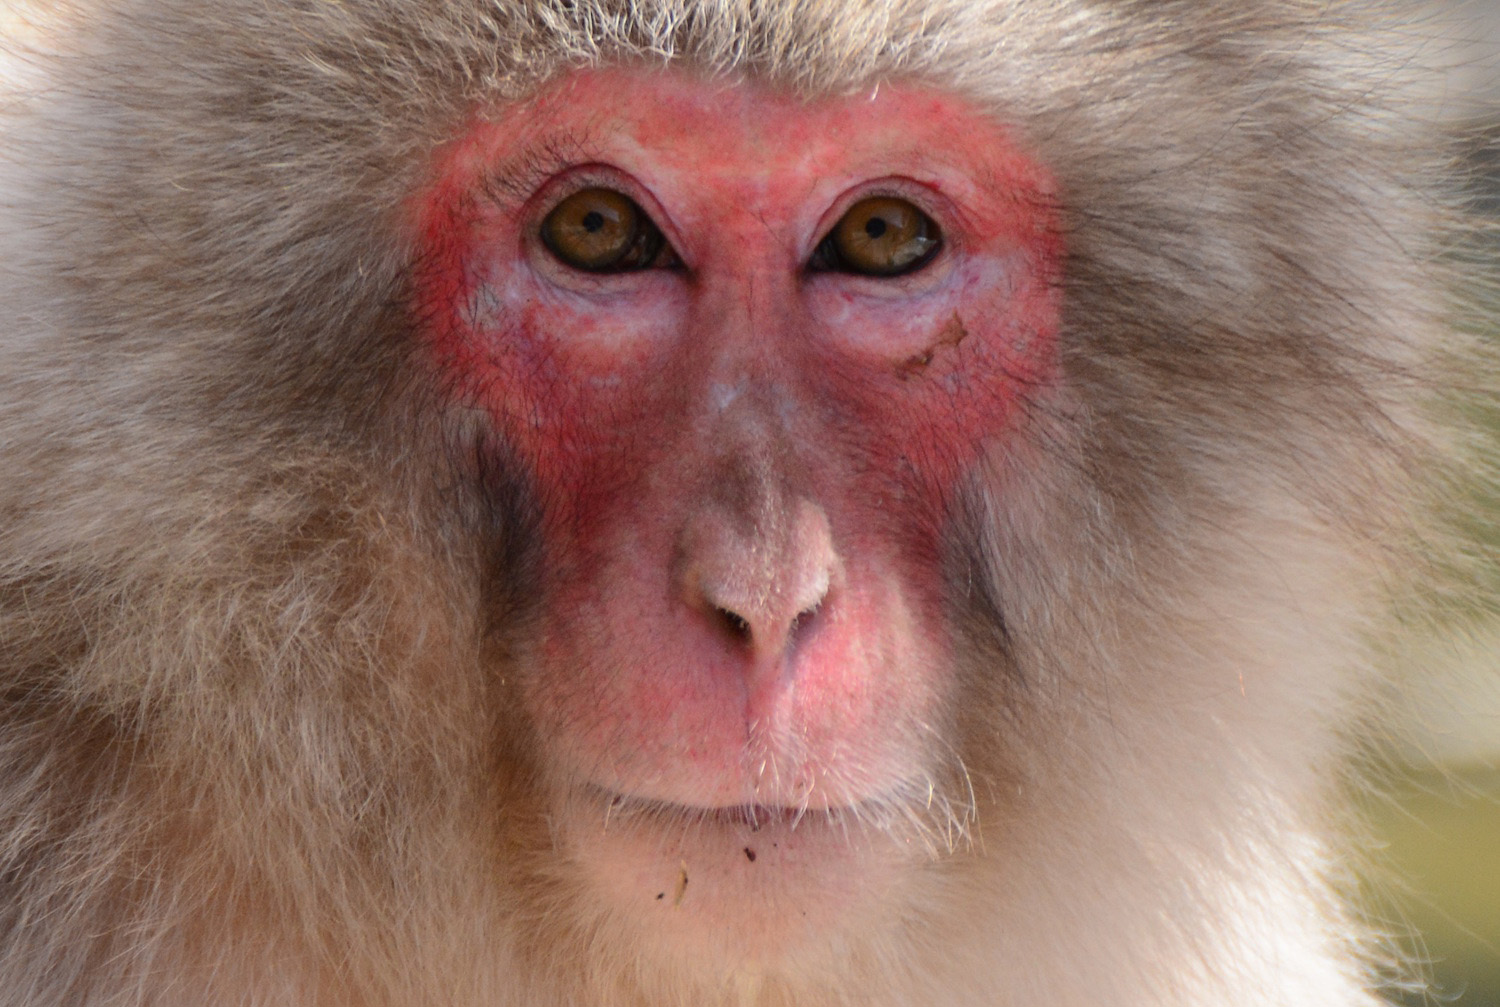 What is a red-faced monkey called?